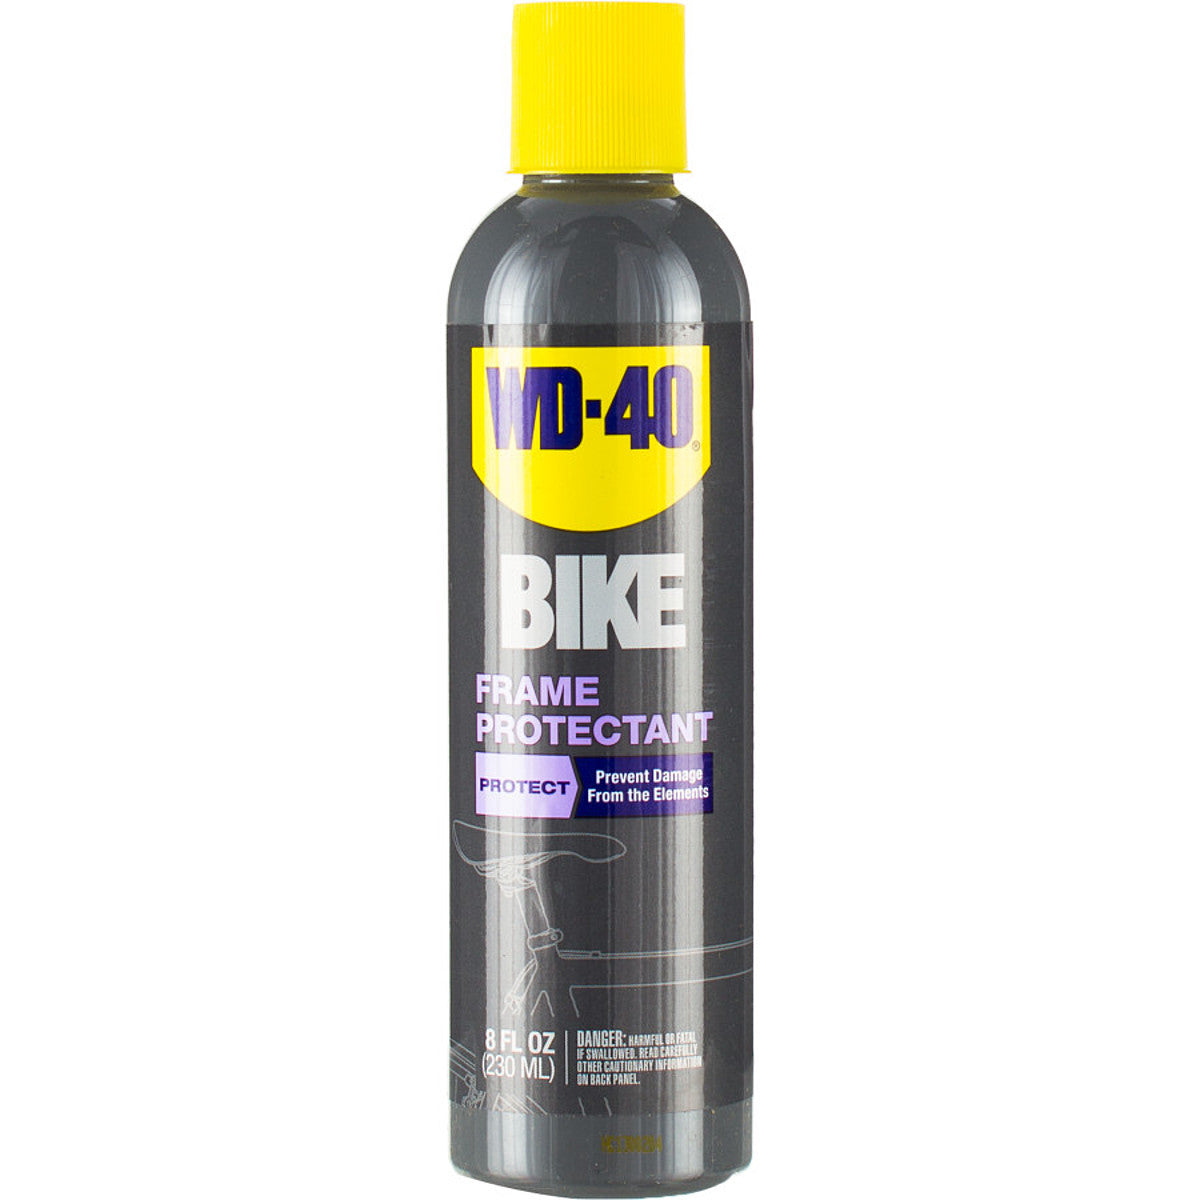 WD-40 Frame Protectant - RideCX cyclocross store